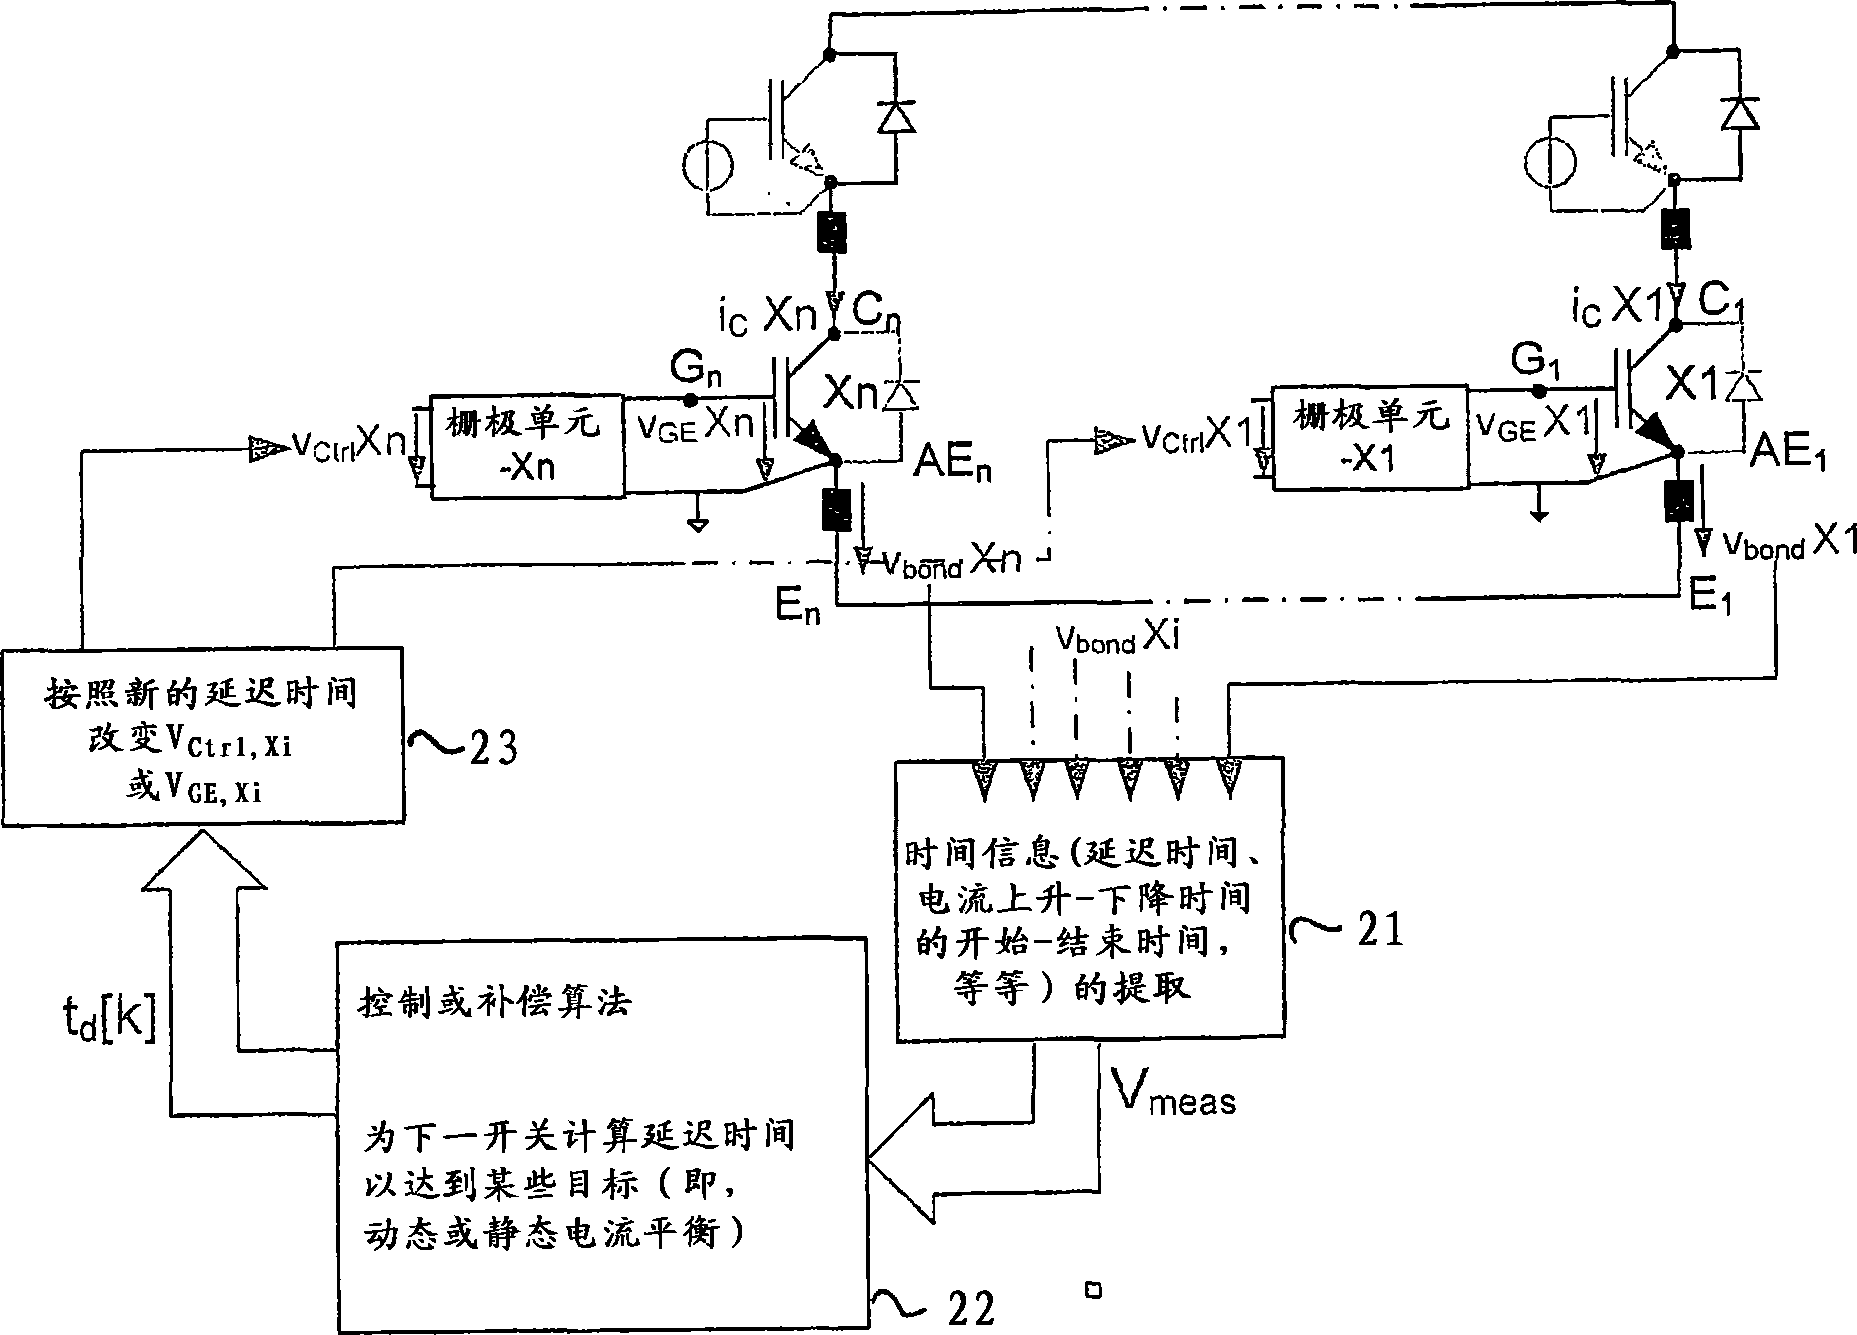 Current balancing of parallel connected semiconductor components